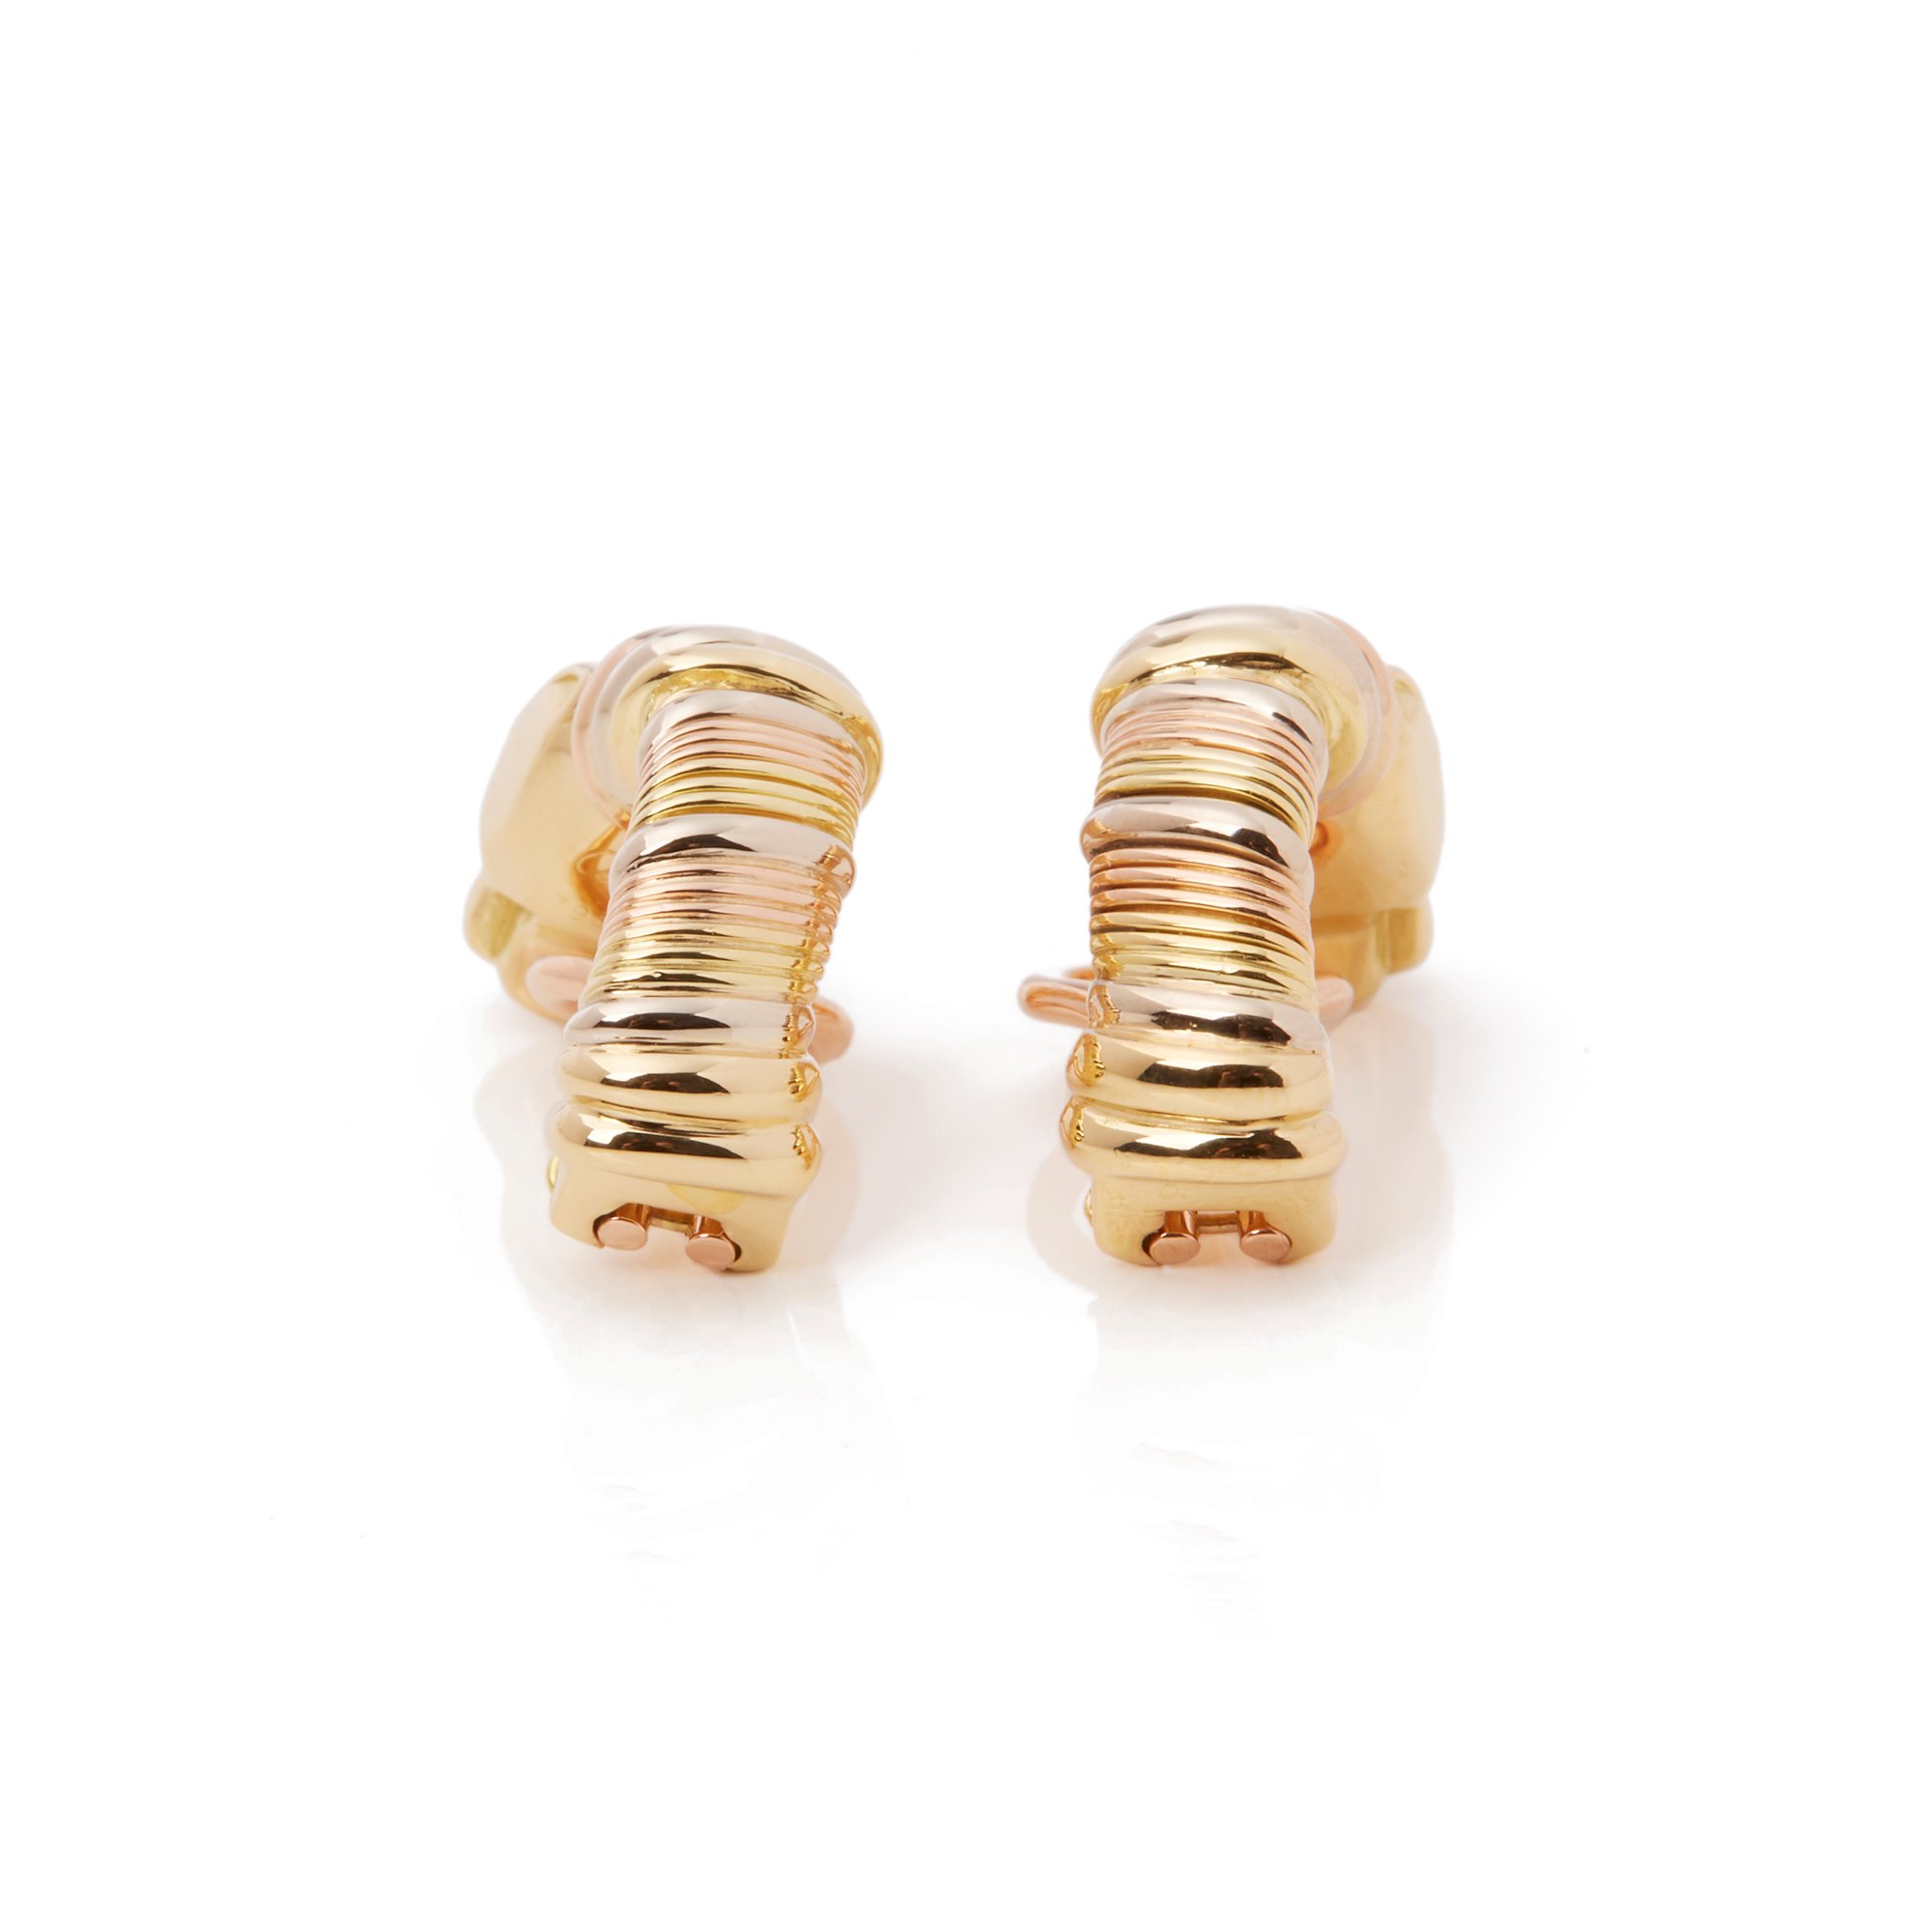 Cartier 18k Yellow, White & Rose Gold Panthère Earrings